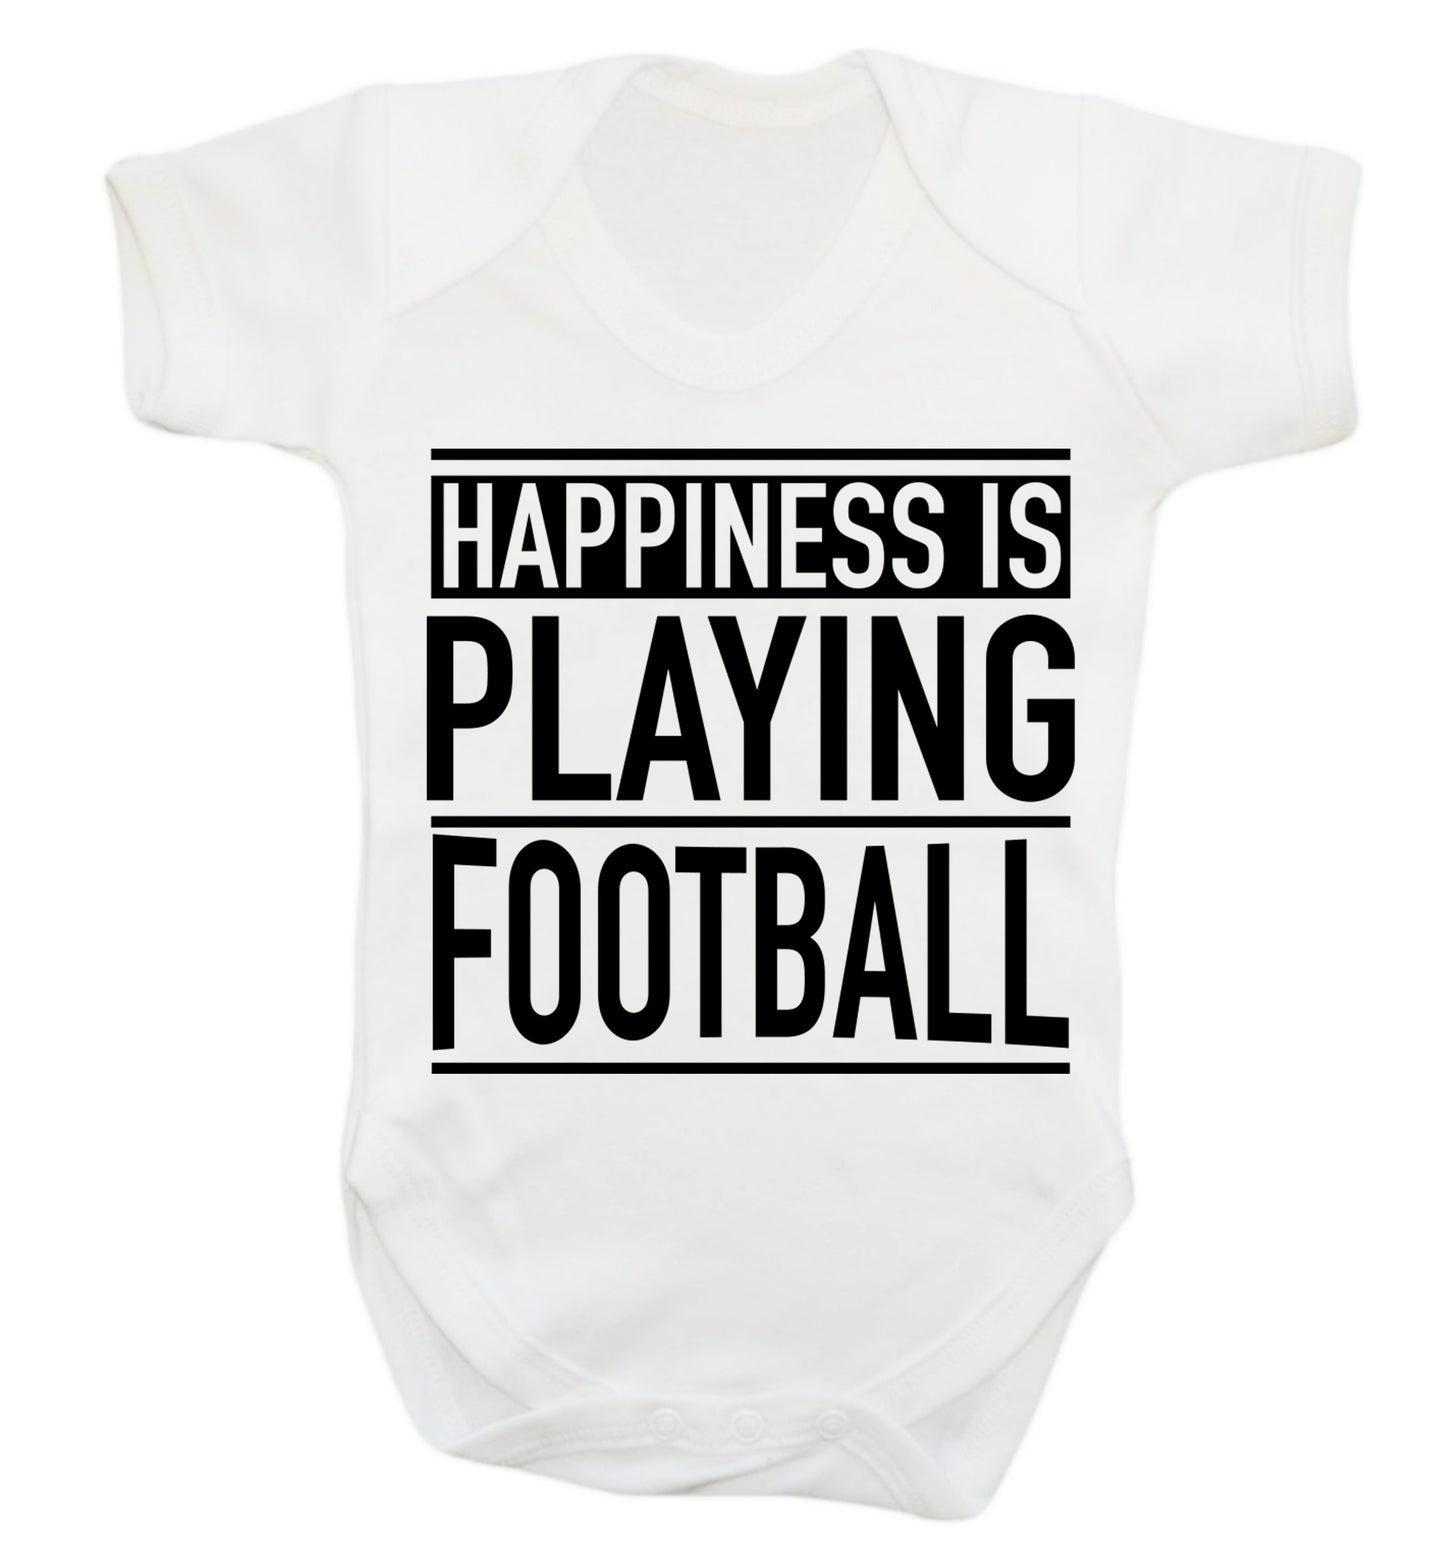 Happiness is playing football Baby Vest white 18-24 months